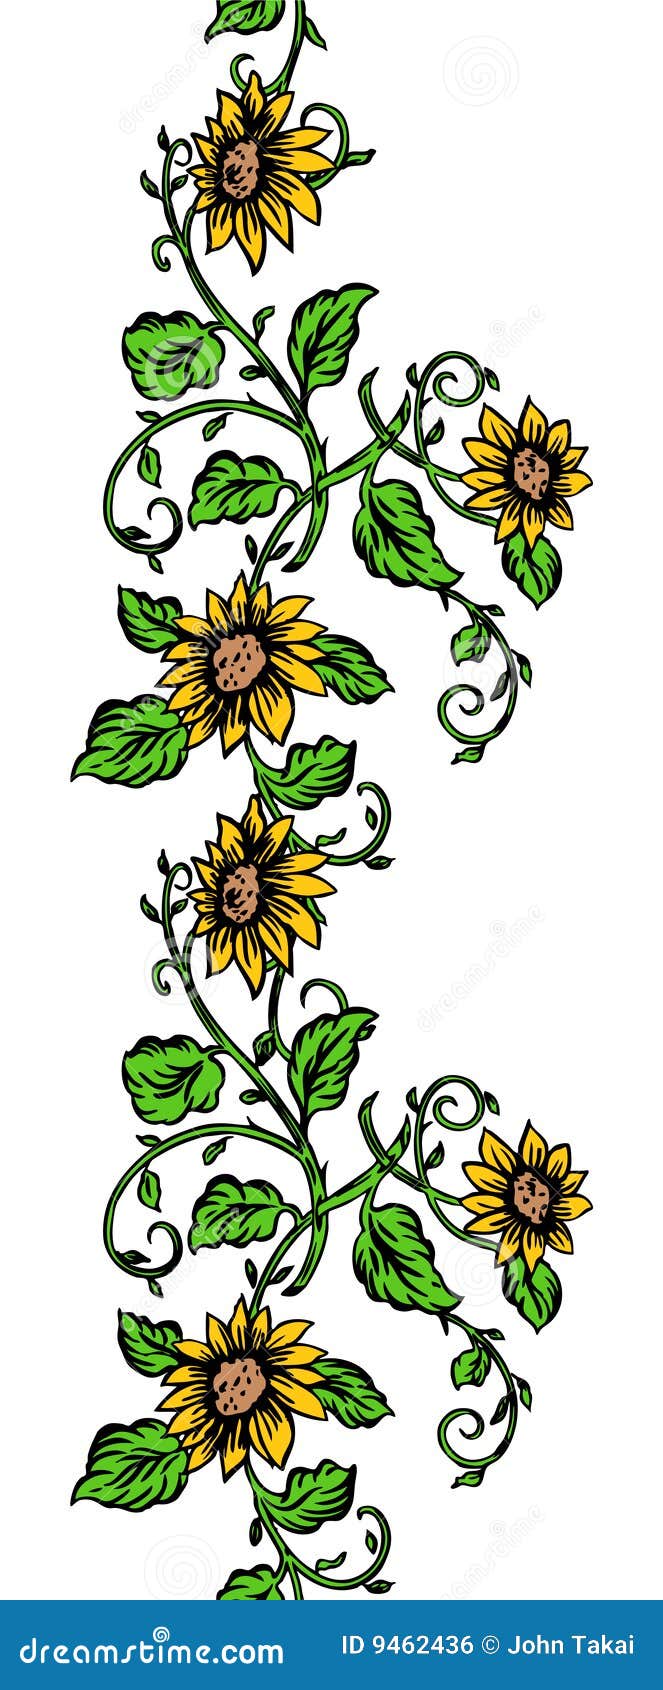 Download Repeating Sunflower Banner stock vector. Illustration of ...